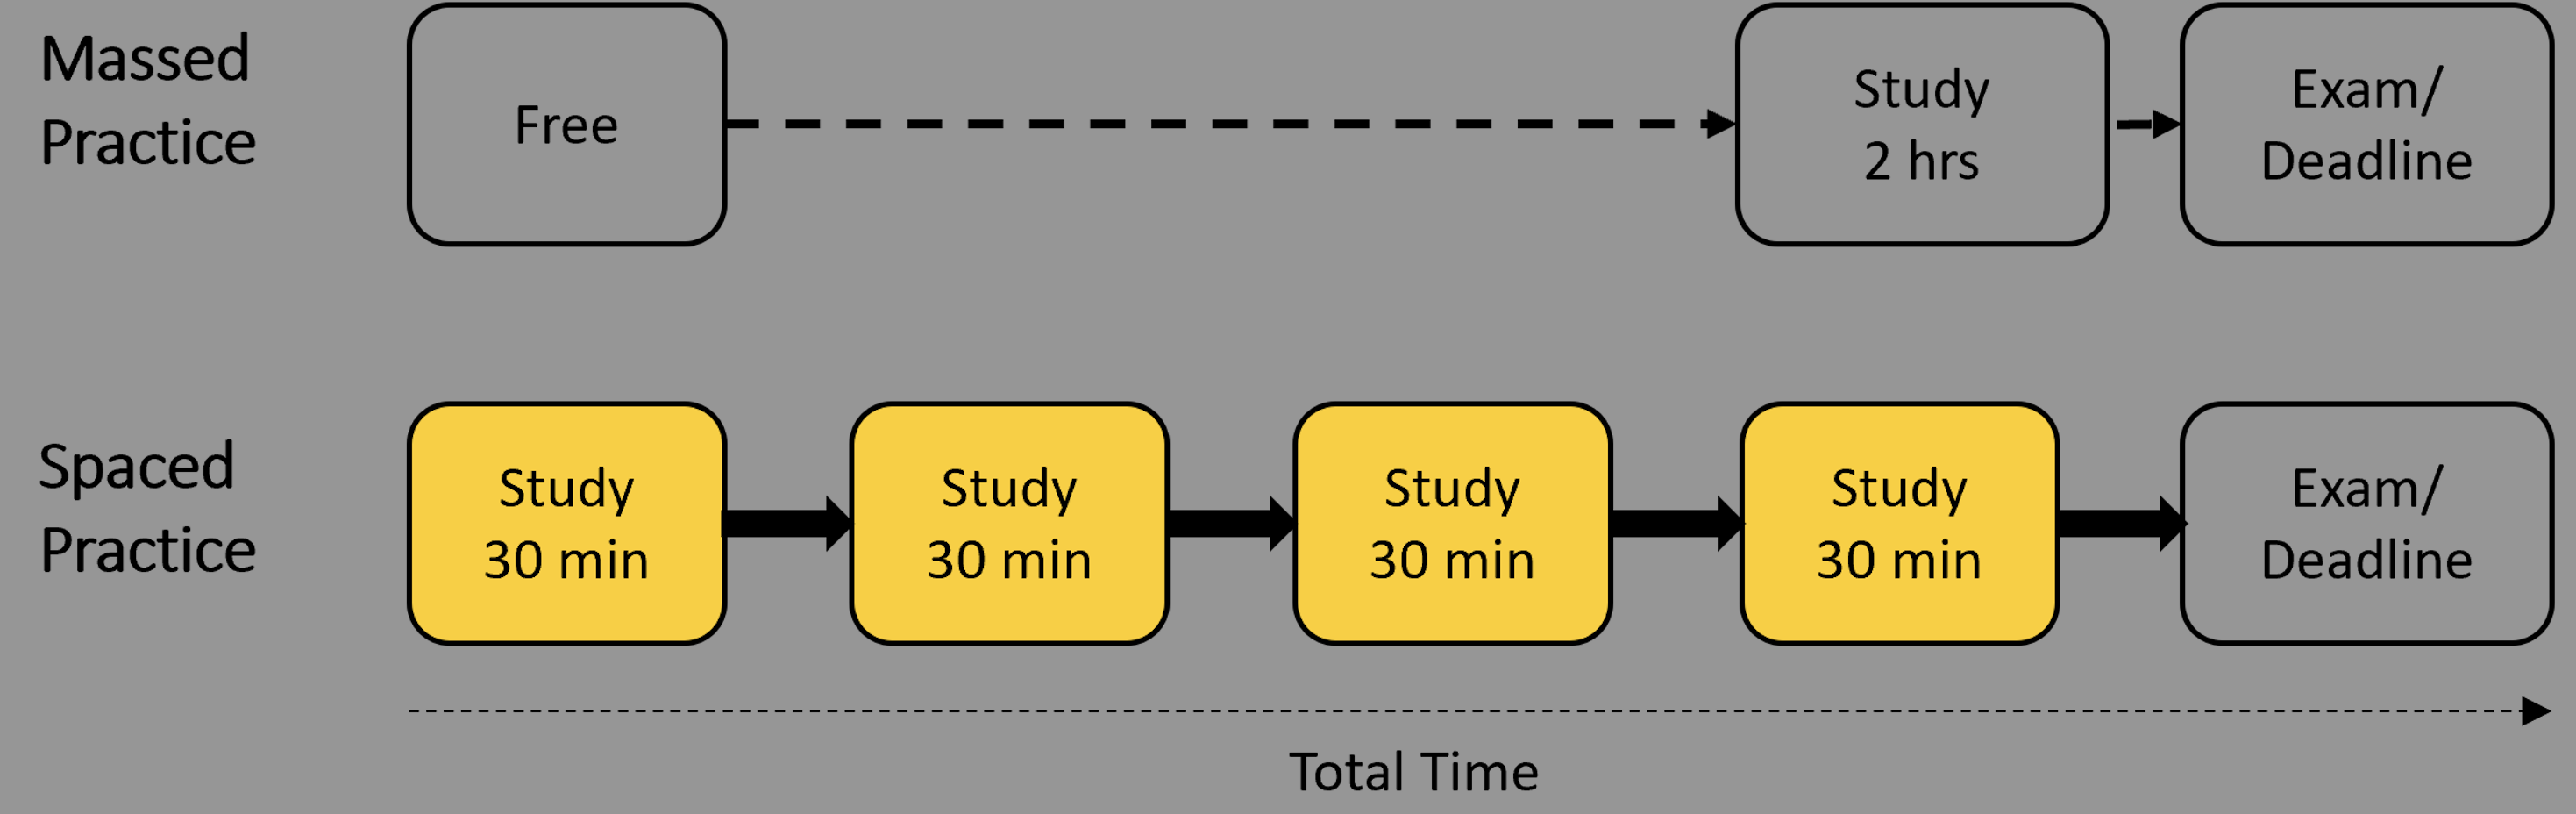 A chart showing spaced practice of studying compared to massed practice